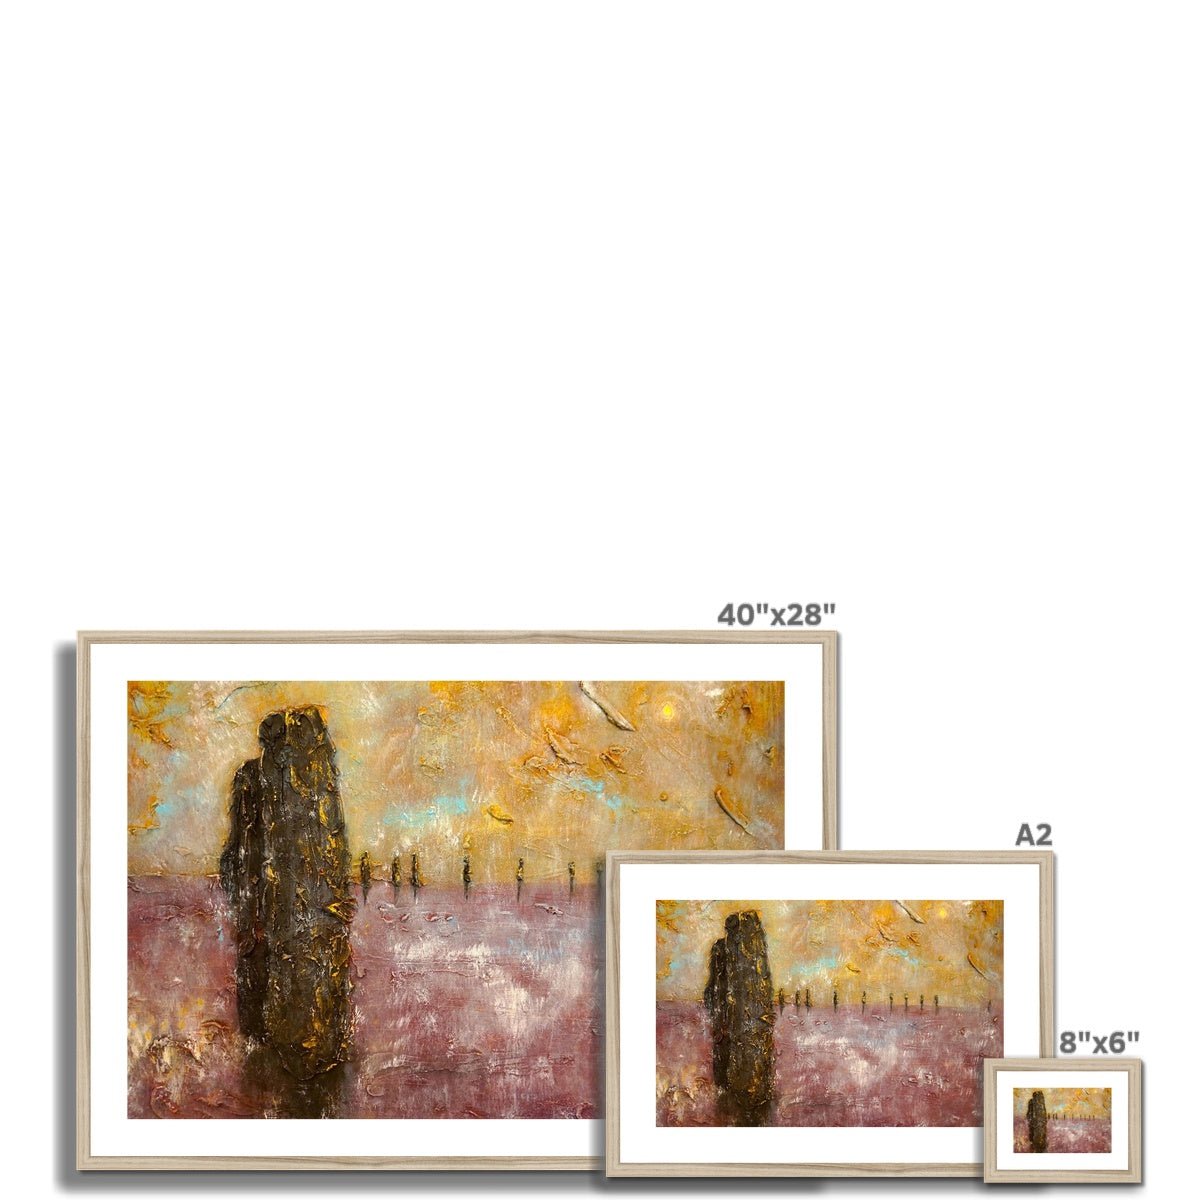 Brodgar Mist Orkney Painting | Framed & Mounted Prints From Scotland-Framed & Mounted Prints-Orkney Art Gallery-Paintings, Prints, Homeware, Art Gifts From Scotland By Scottish Artist Kevin Hunter